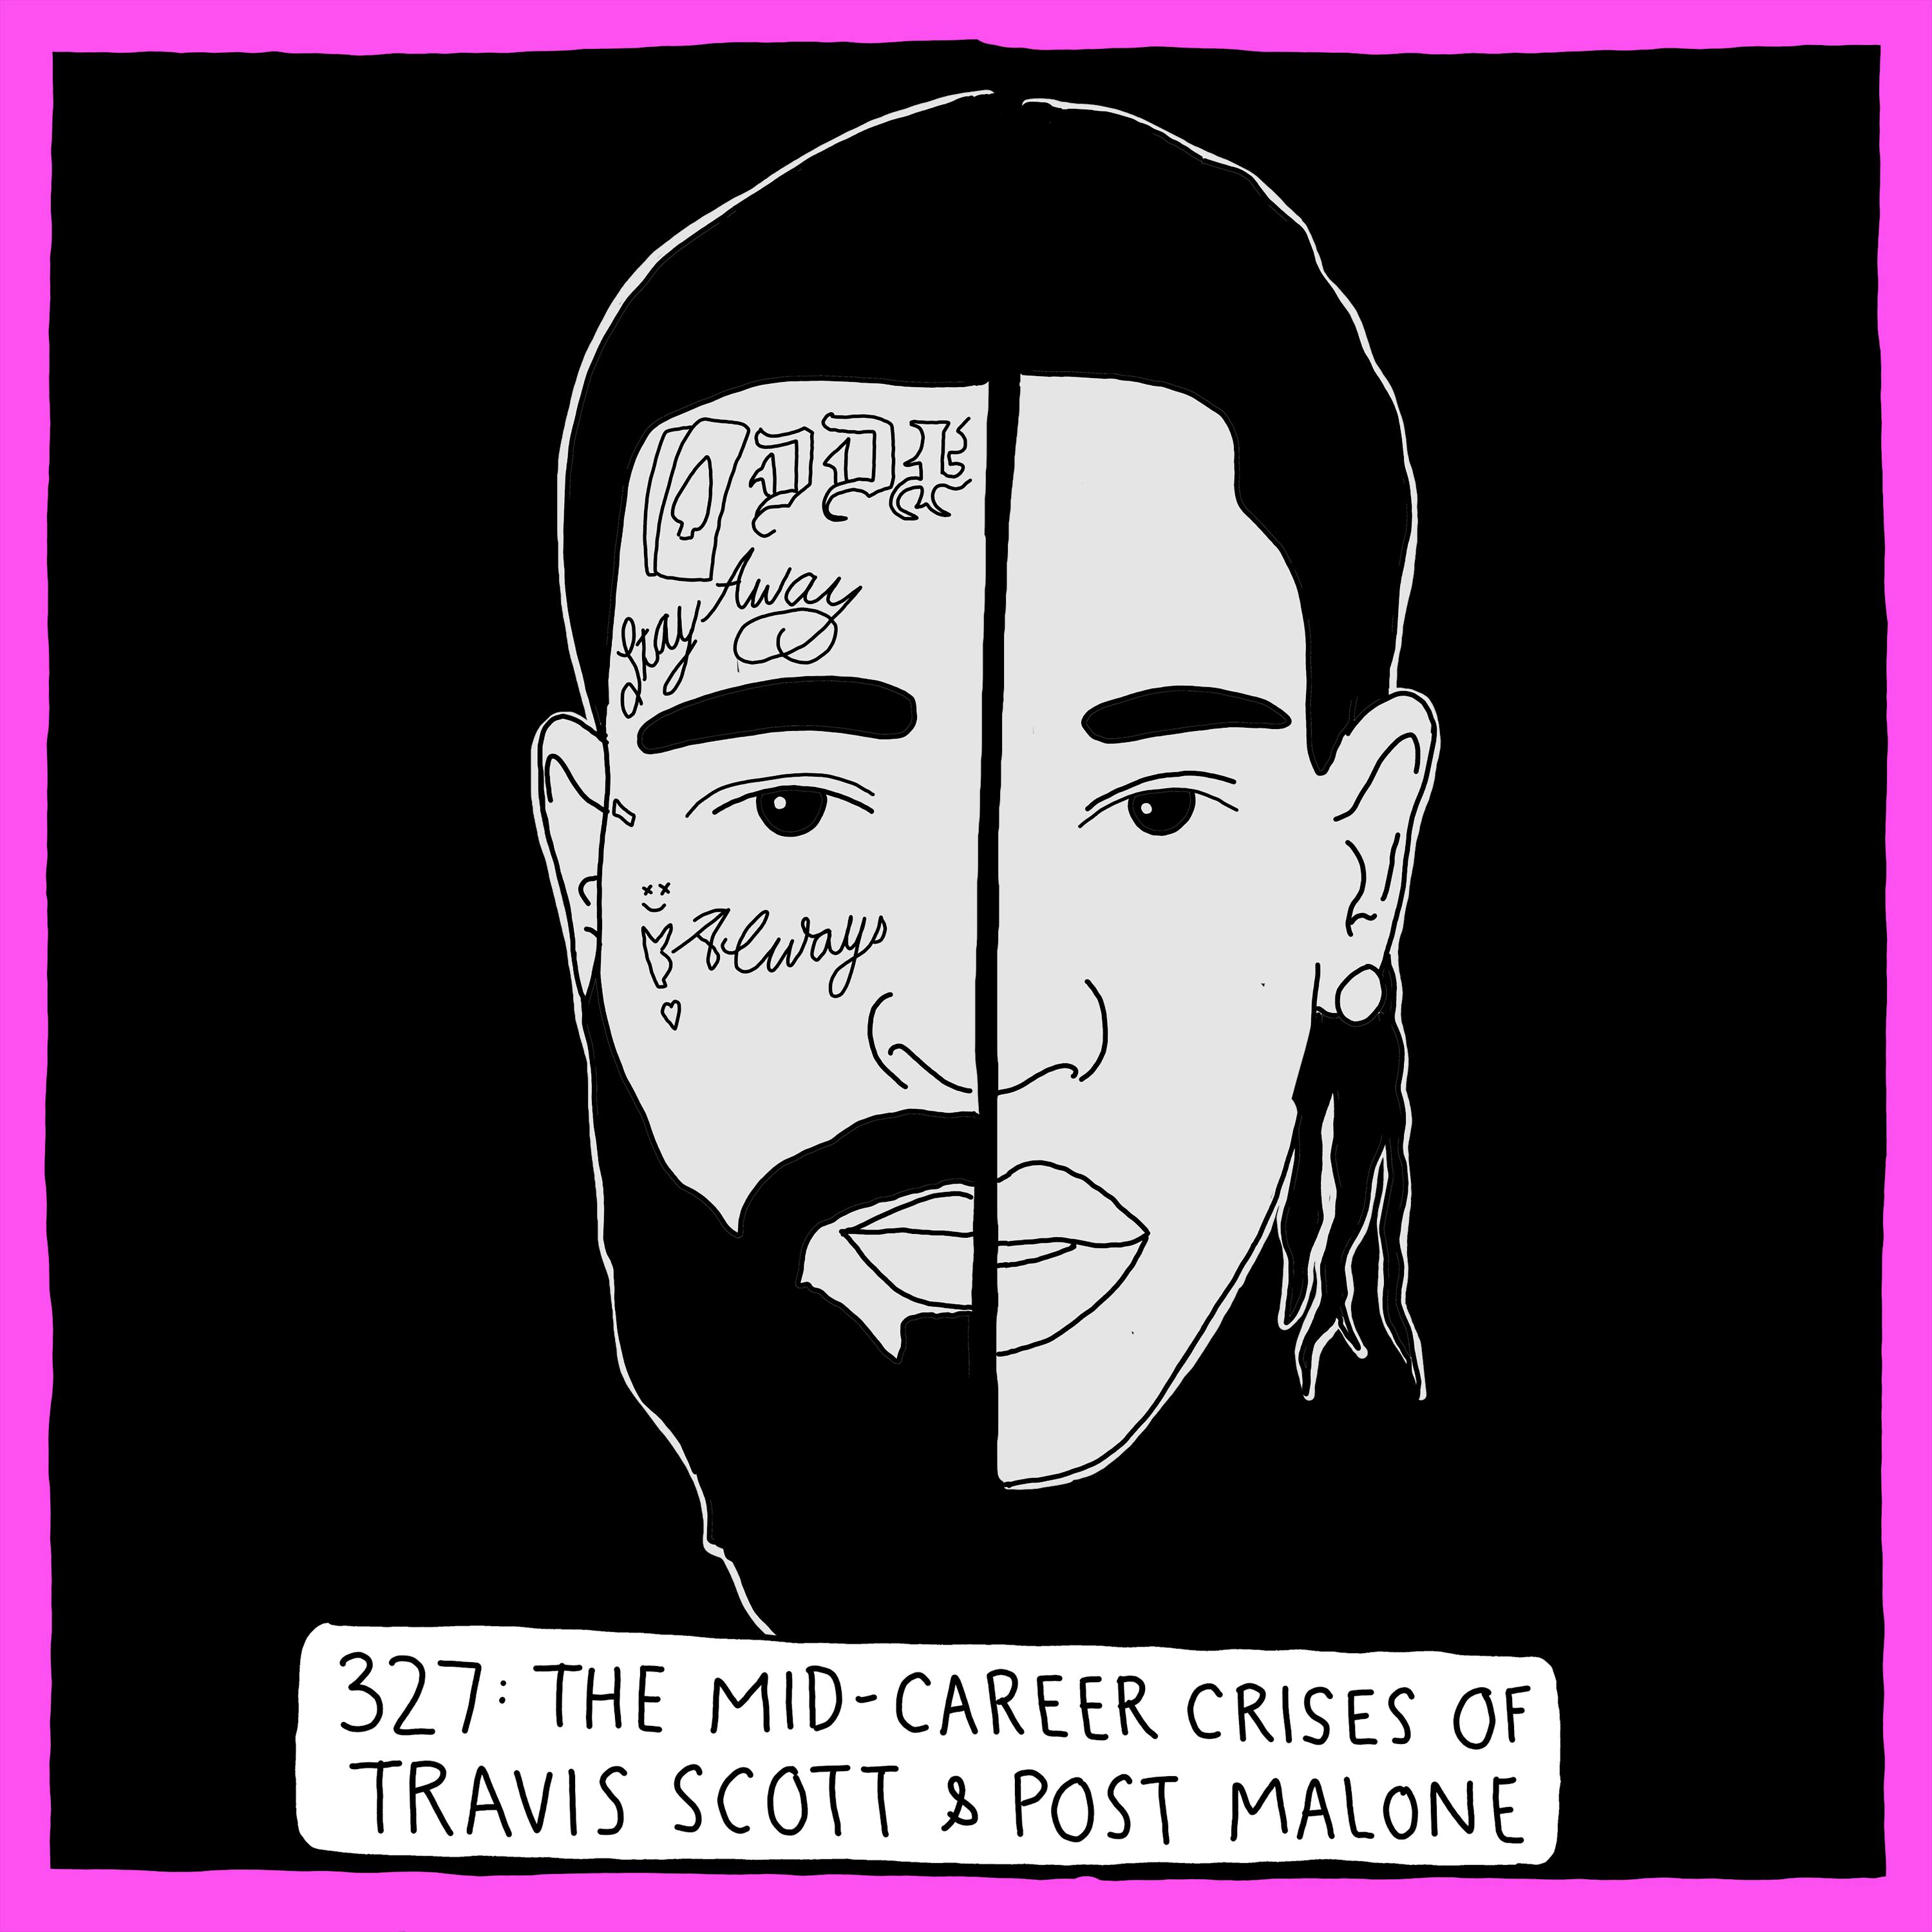 The mid-career crises of Travis Scott and Post Malone